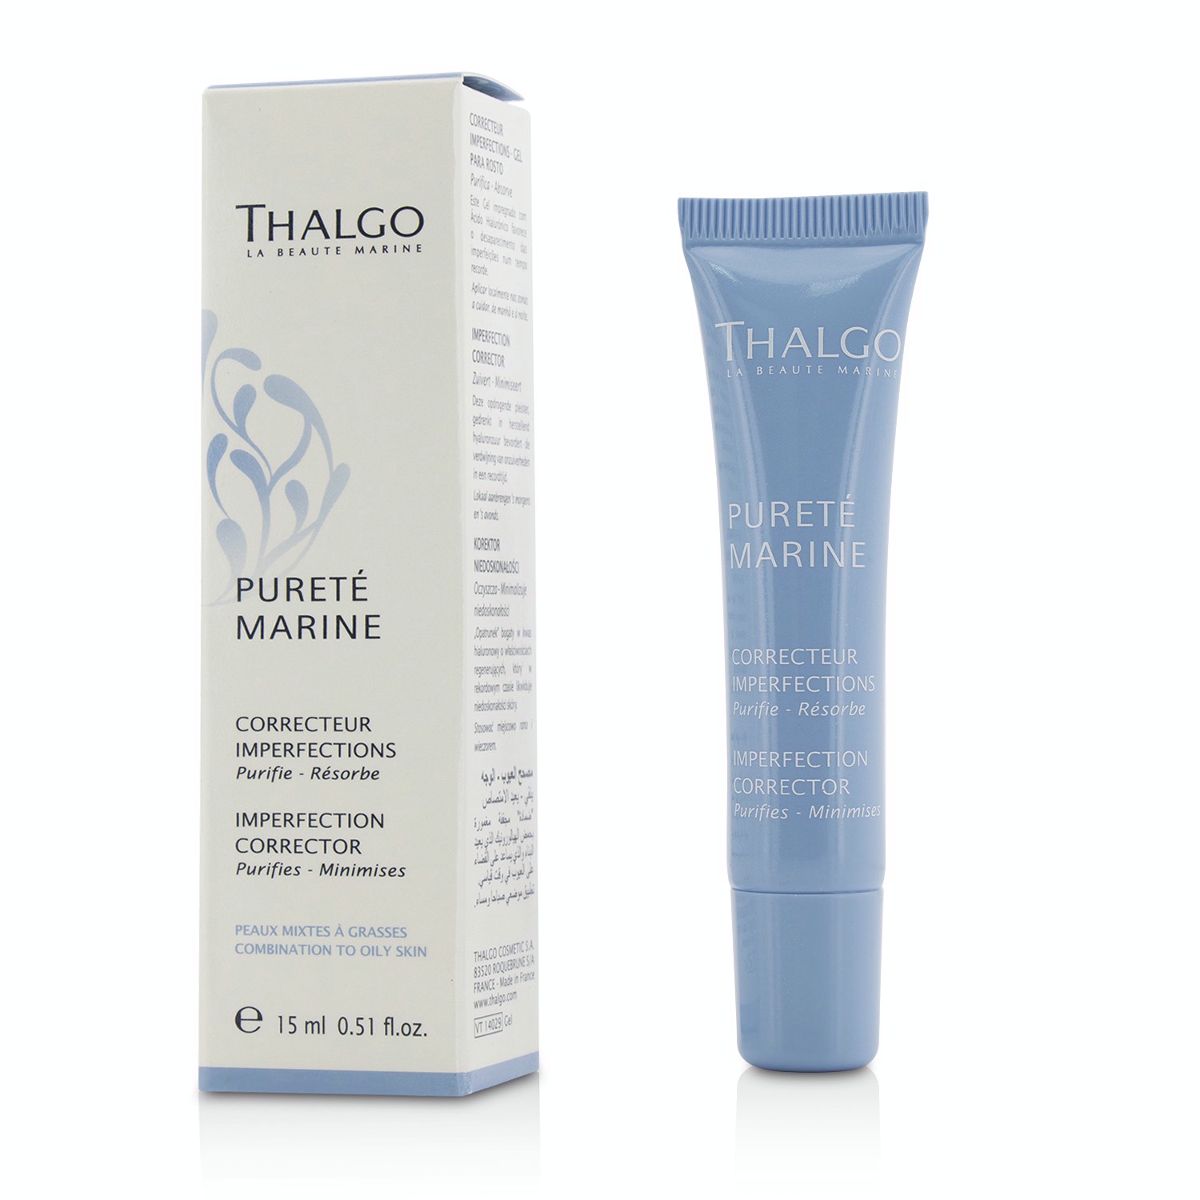 Purete Marine Imperfection Corrector - For Combination to Oily Skin Thalgo Image